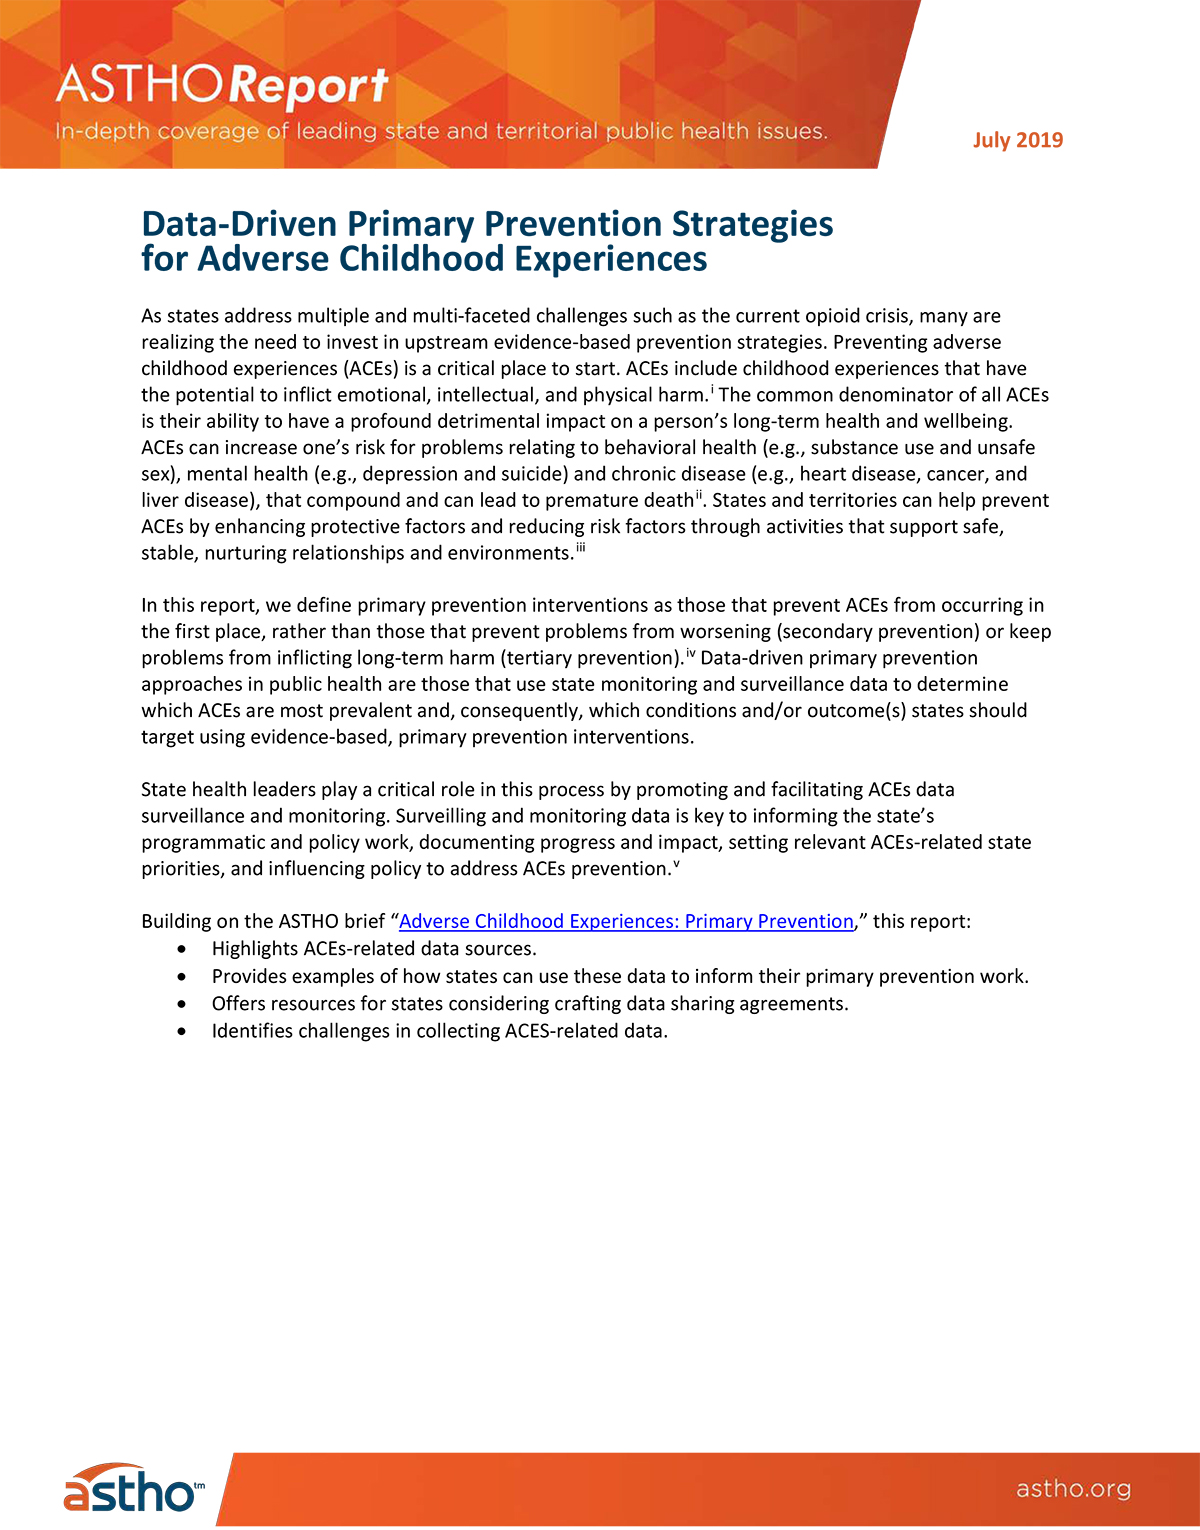 Data-Driven Primary Prevention Strategies for Adverse Childhood Experiences